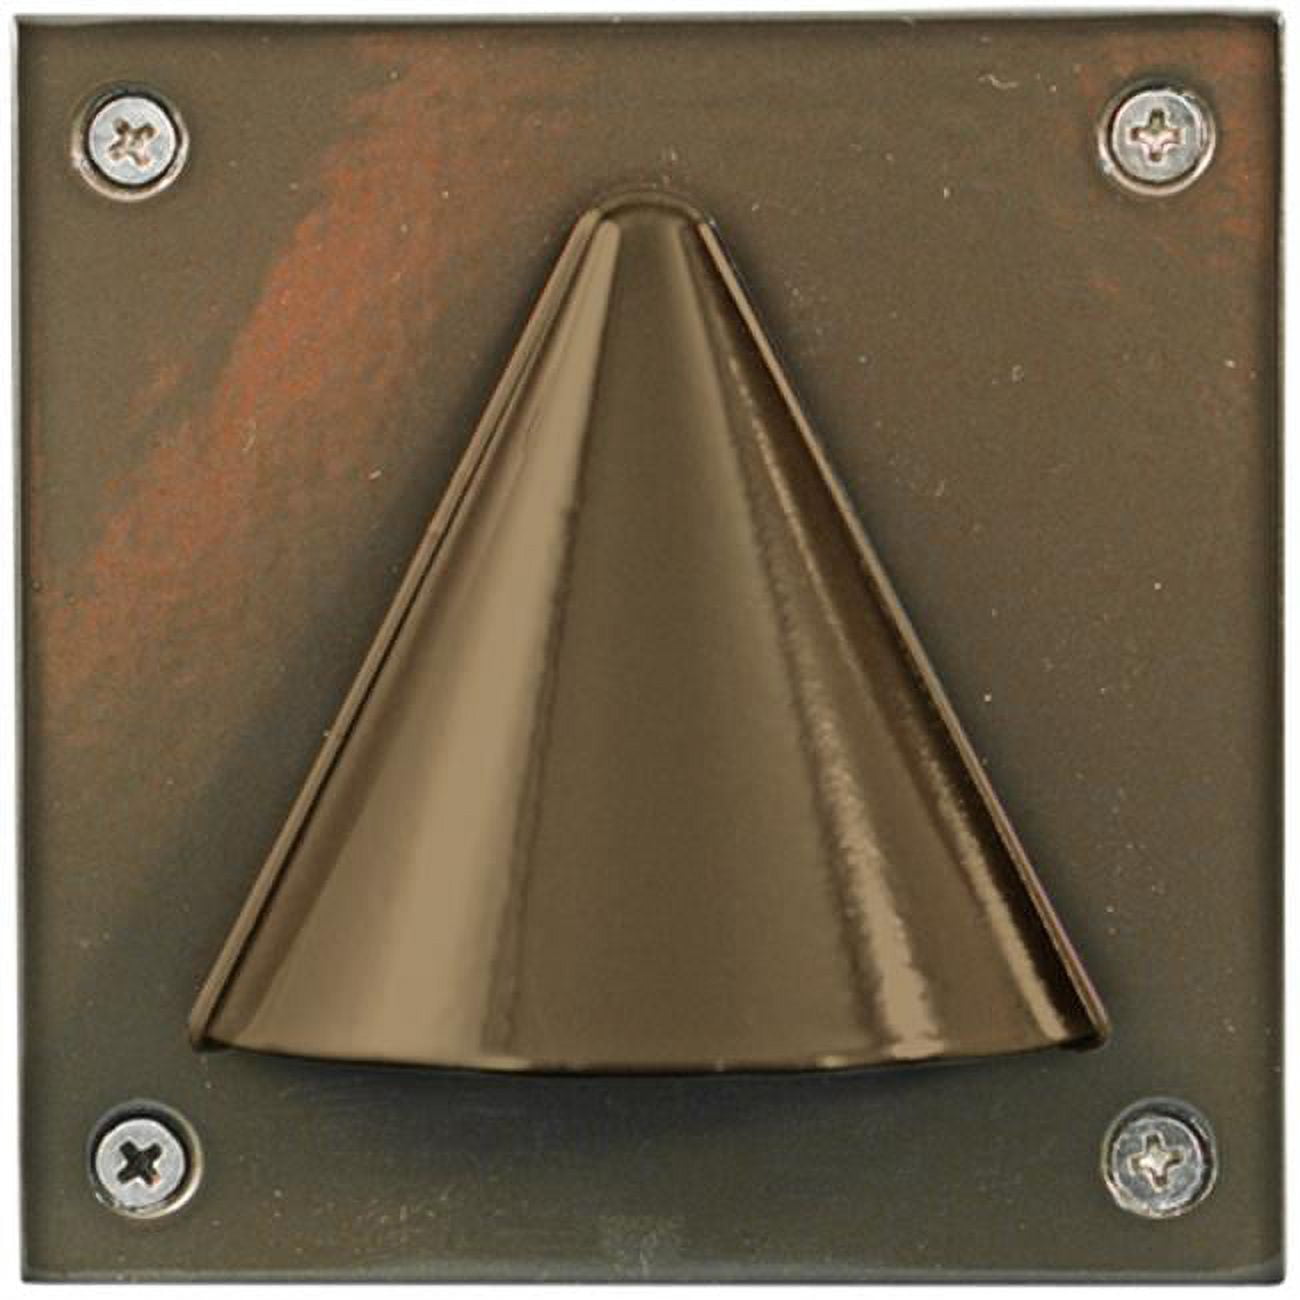 Picture of Dabmar Lighting LV607-BZ Cast Aluminum Recessed Brick, Step & Wall Light, Bronze - 3.88 x 3.88 x 4.13 in.